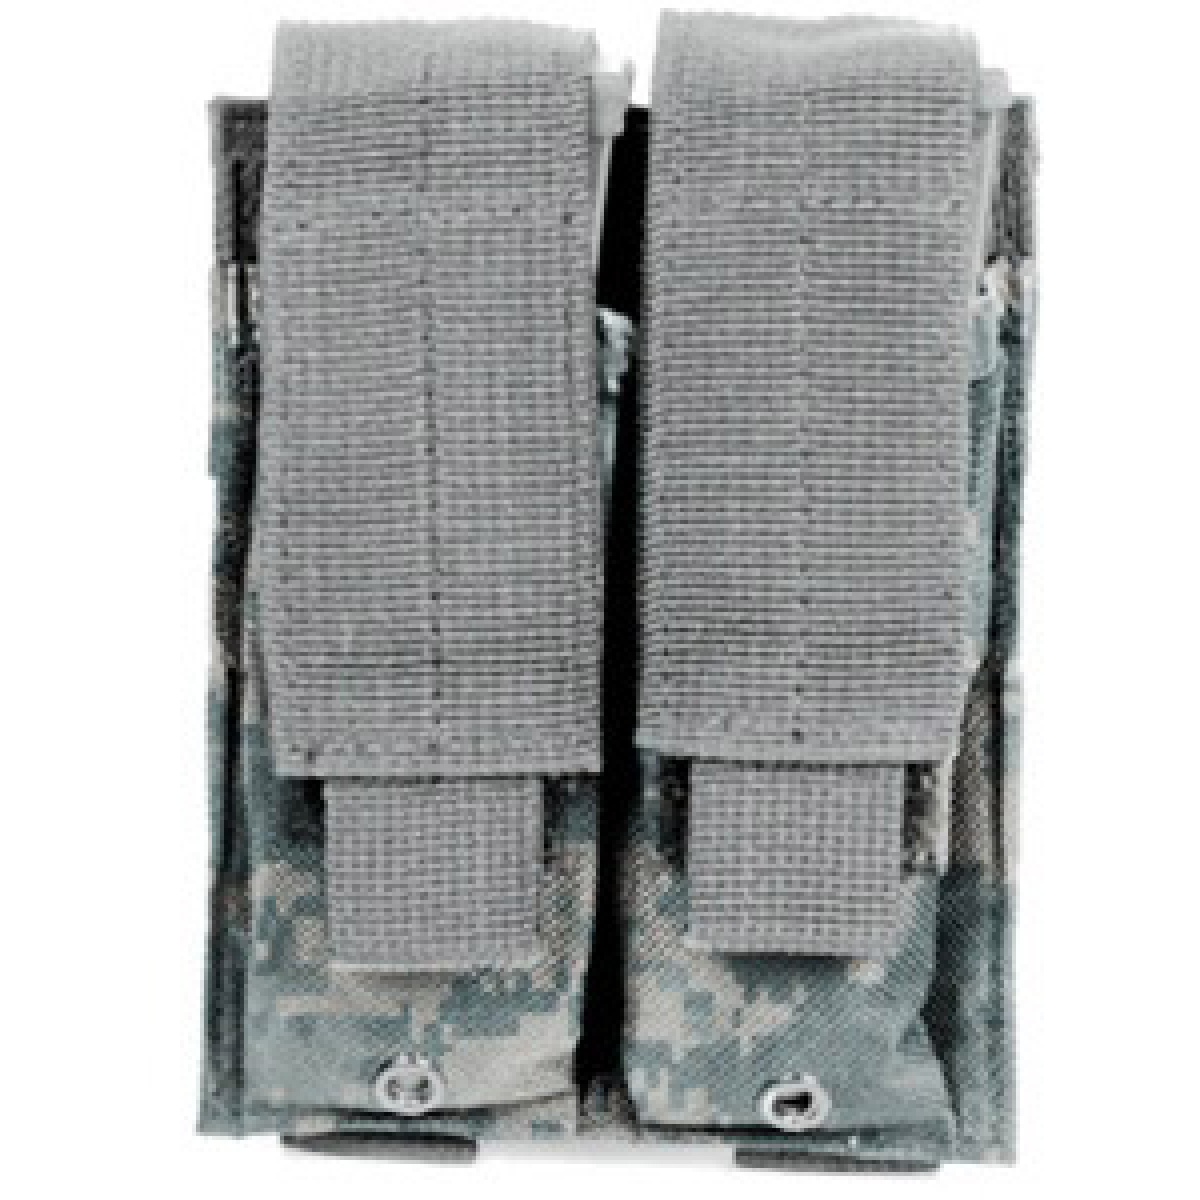 VISM Double Pistol Magazine MOLLE Pouch Tactical Duty Gear Hunting BLACK~ 